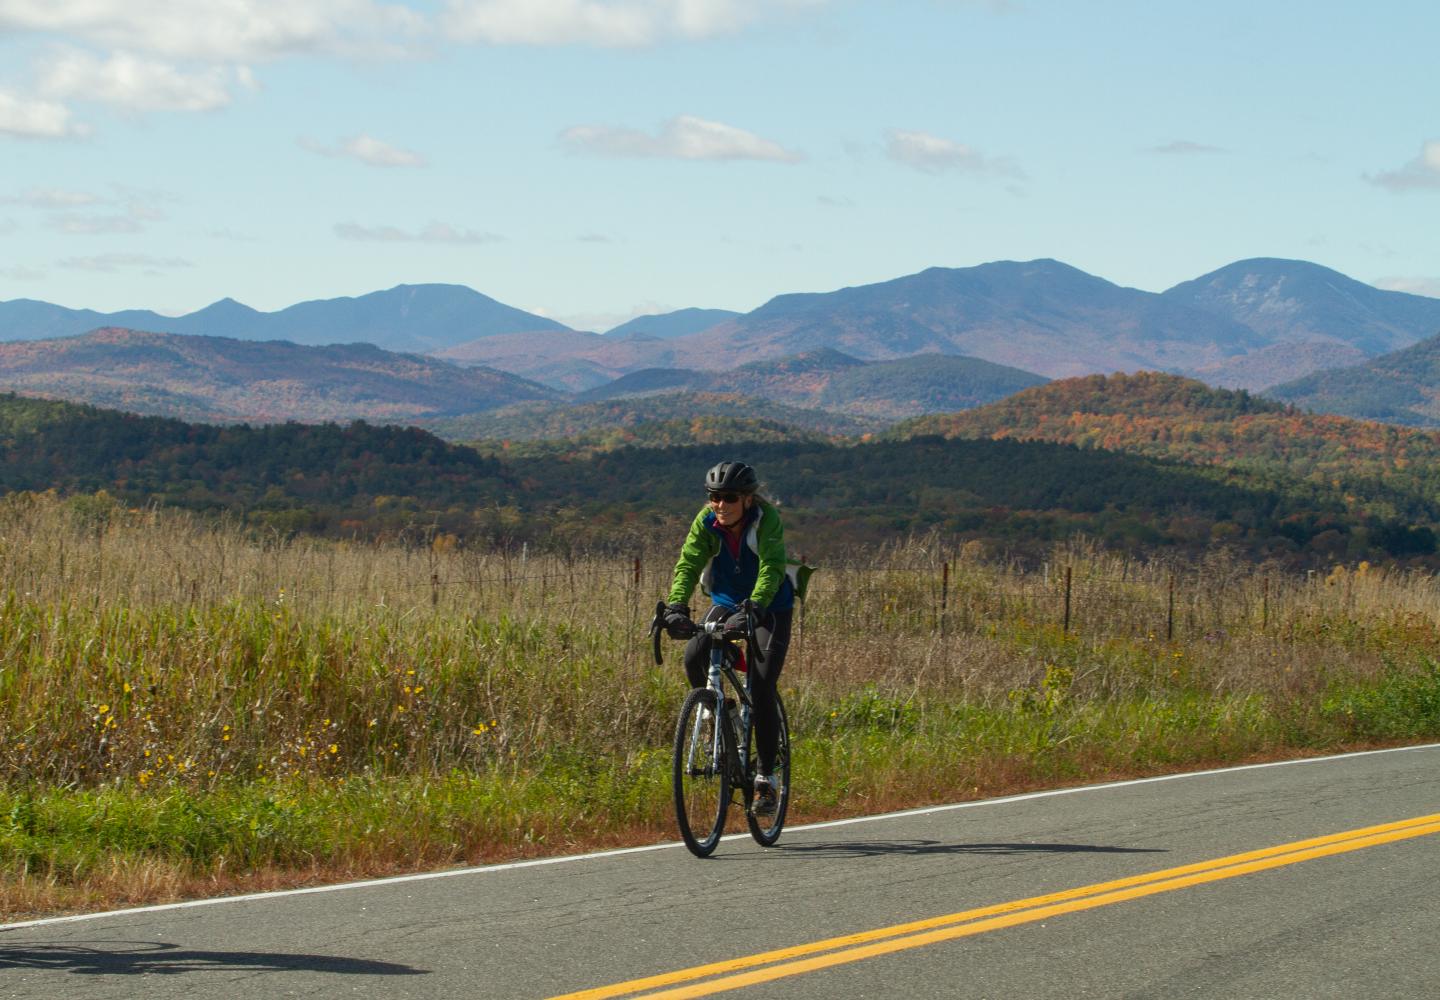 Did we mention the mountain views. These ones just happen to be the Adirondacks.